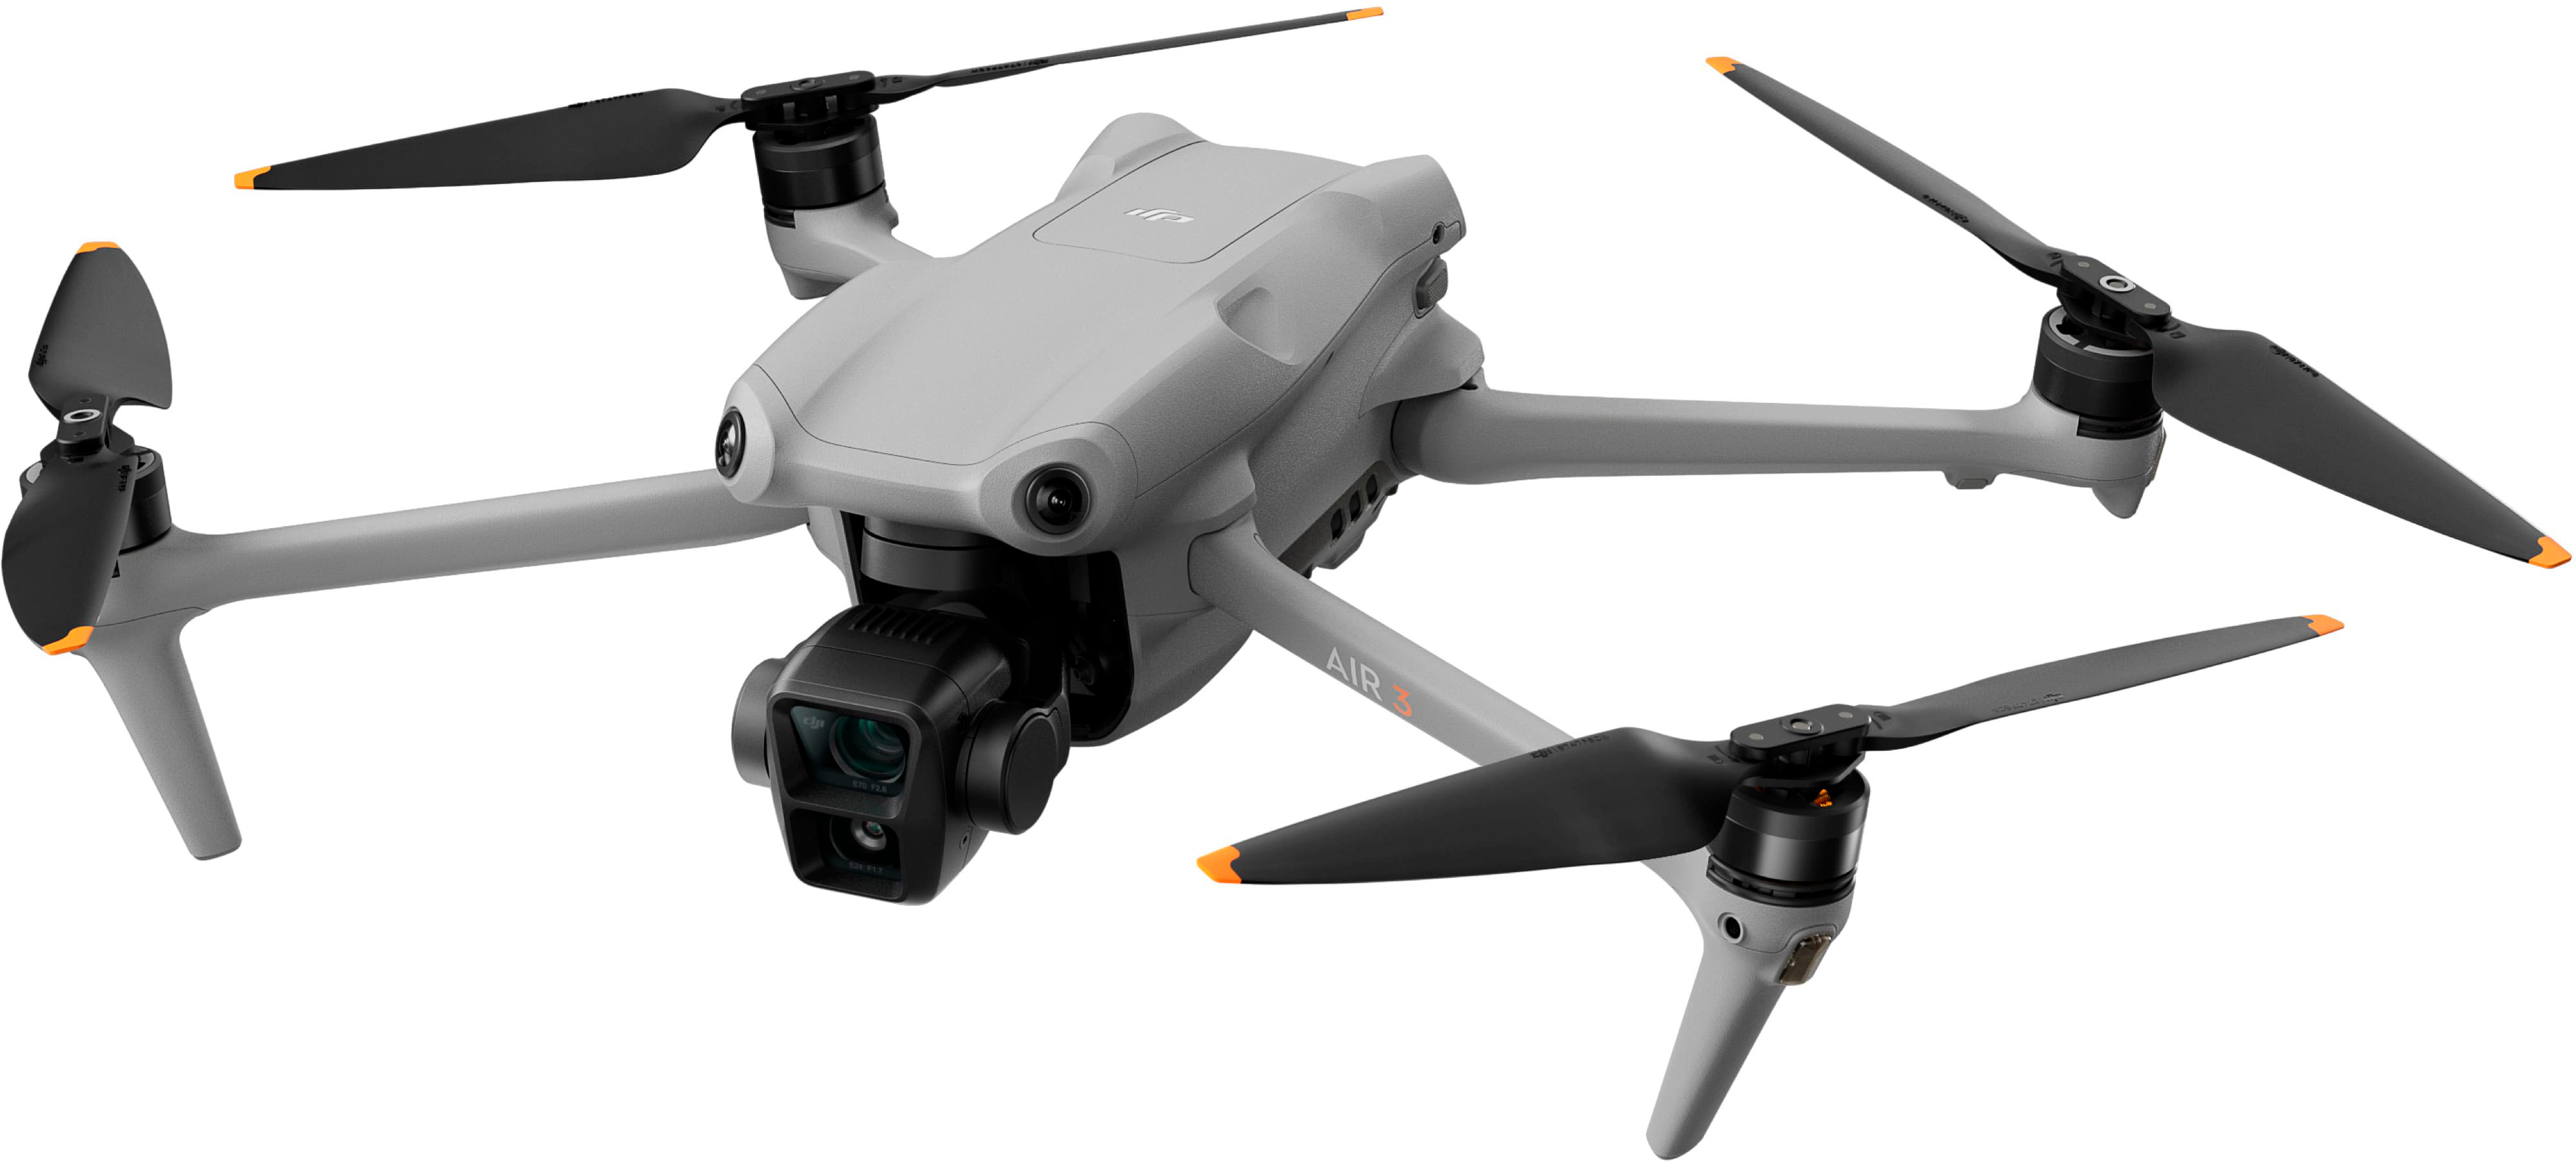 The DJI Air 3 is official with two cameras - a wide and a